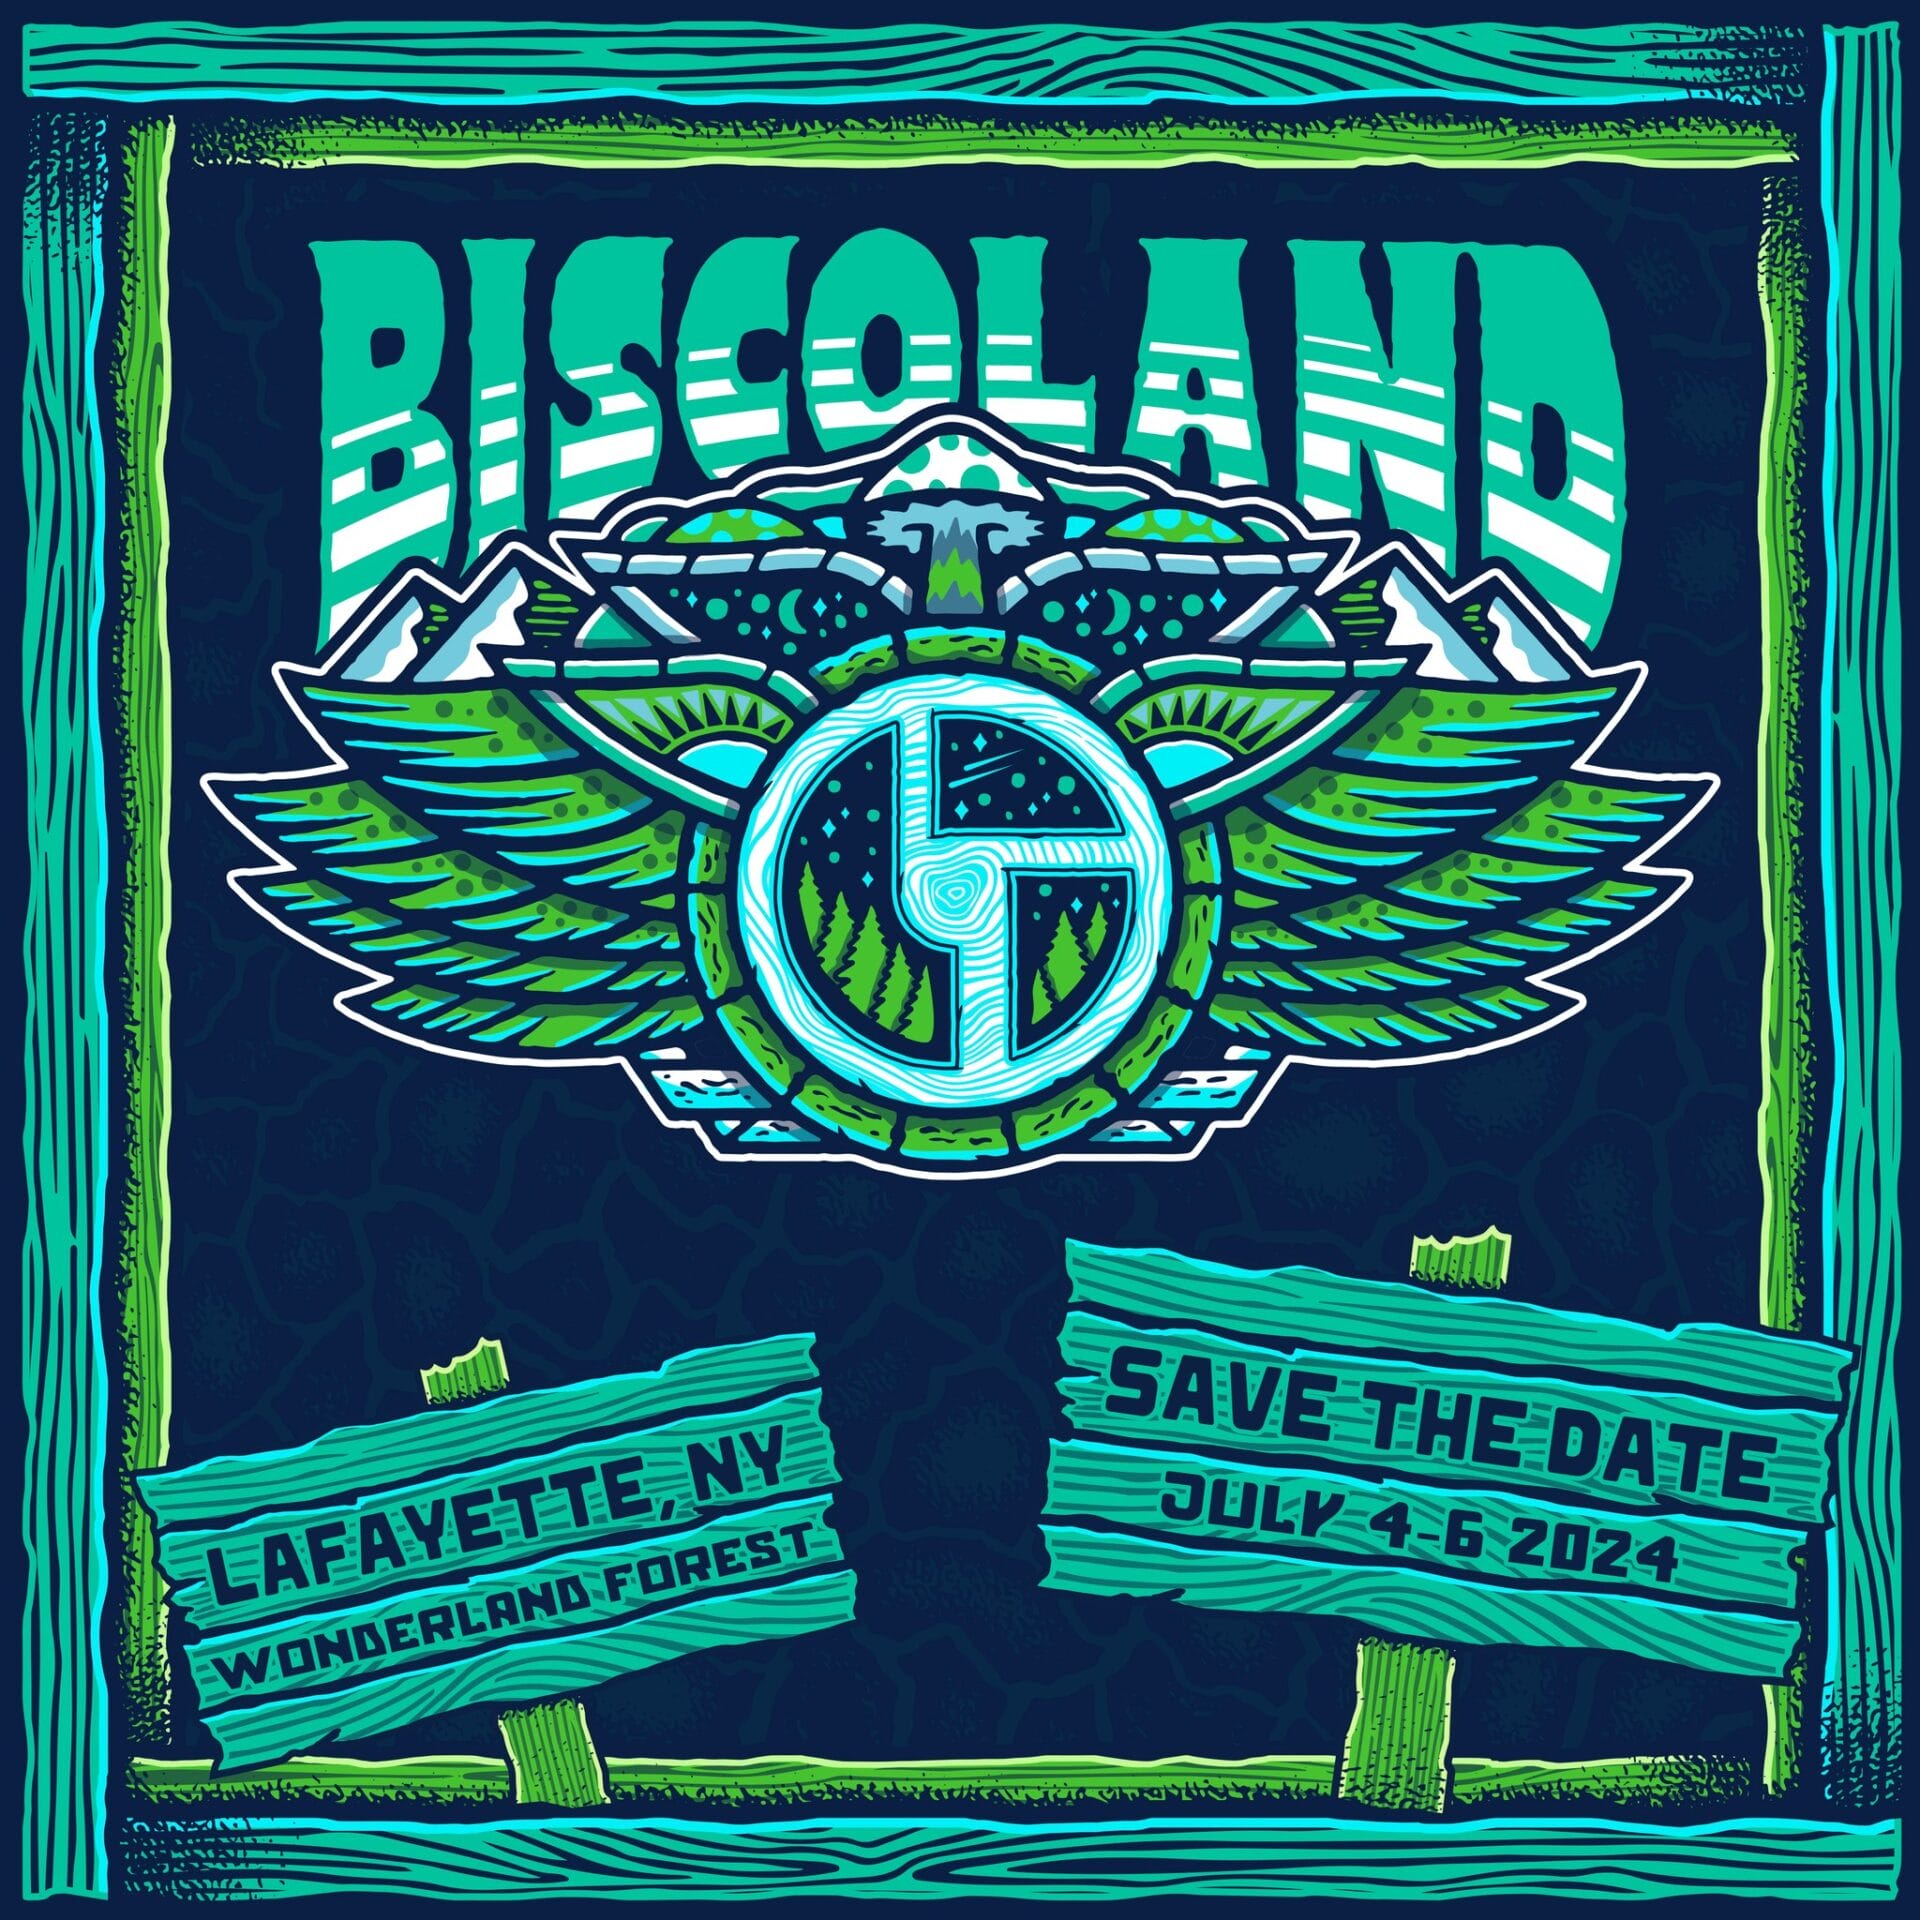 The Disco Biscuits’ BISCOLAND Announces Expanded Return in July